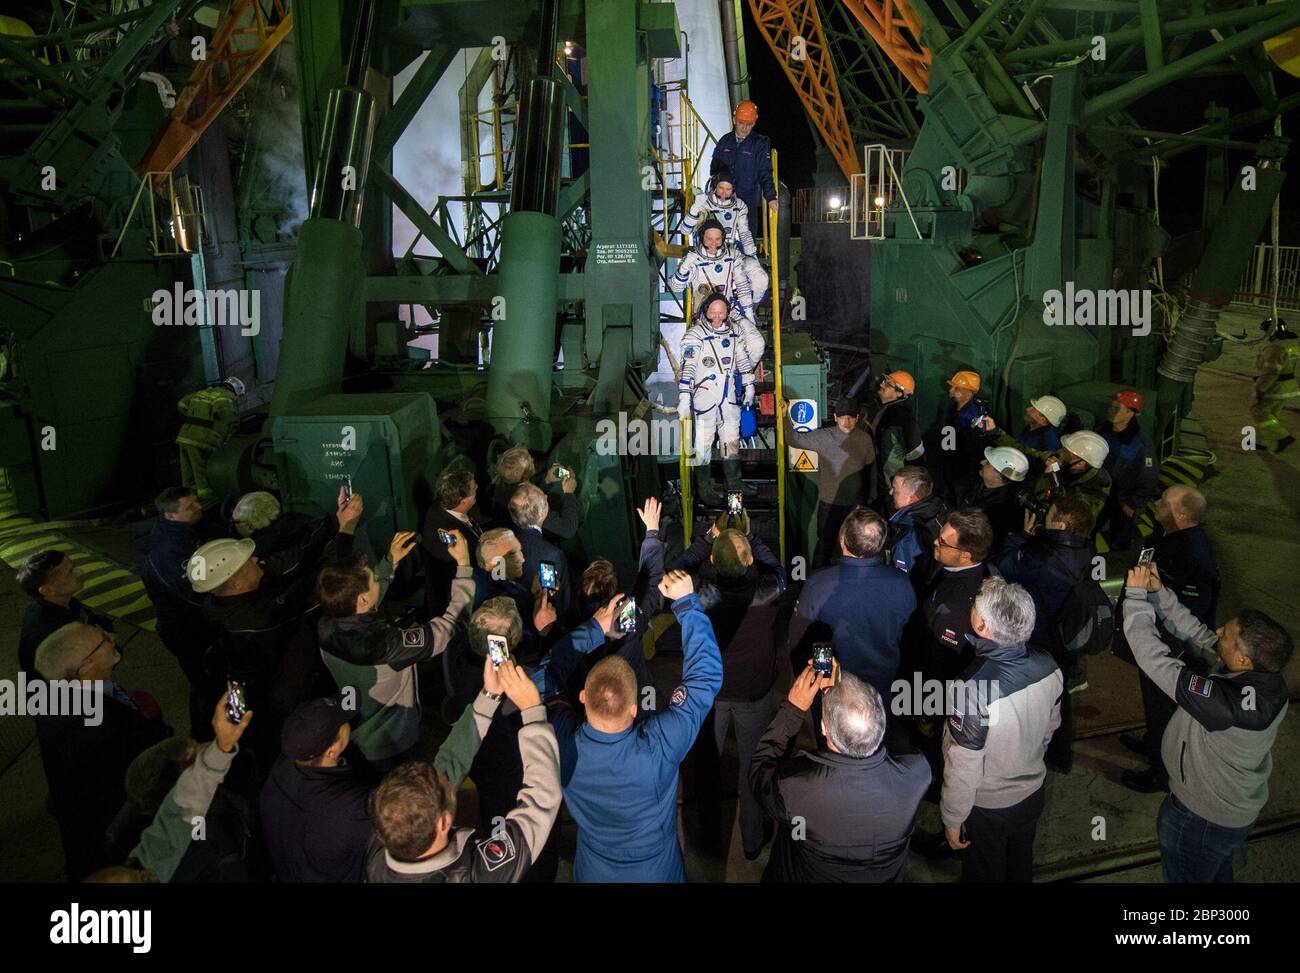 Expedition 55 Preflight  Expedition 55 flight engineer Drew Feustel of NASA, top, flight engineer Ricky Arnold of NASA, middle, and Soyuz Commander Oleg Artemyev of Roscosmos, bottom, wave farewell prior to boarding the Soyuz MS-08 spacecraft for launch, Wednesday, March 21, 2018 at the Baikonur Cosmodrome in Kazakhstan. Feustel, Arnold, and Artemyev will spend the next five months living and working aboard the International Space Station. Stock Photo